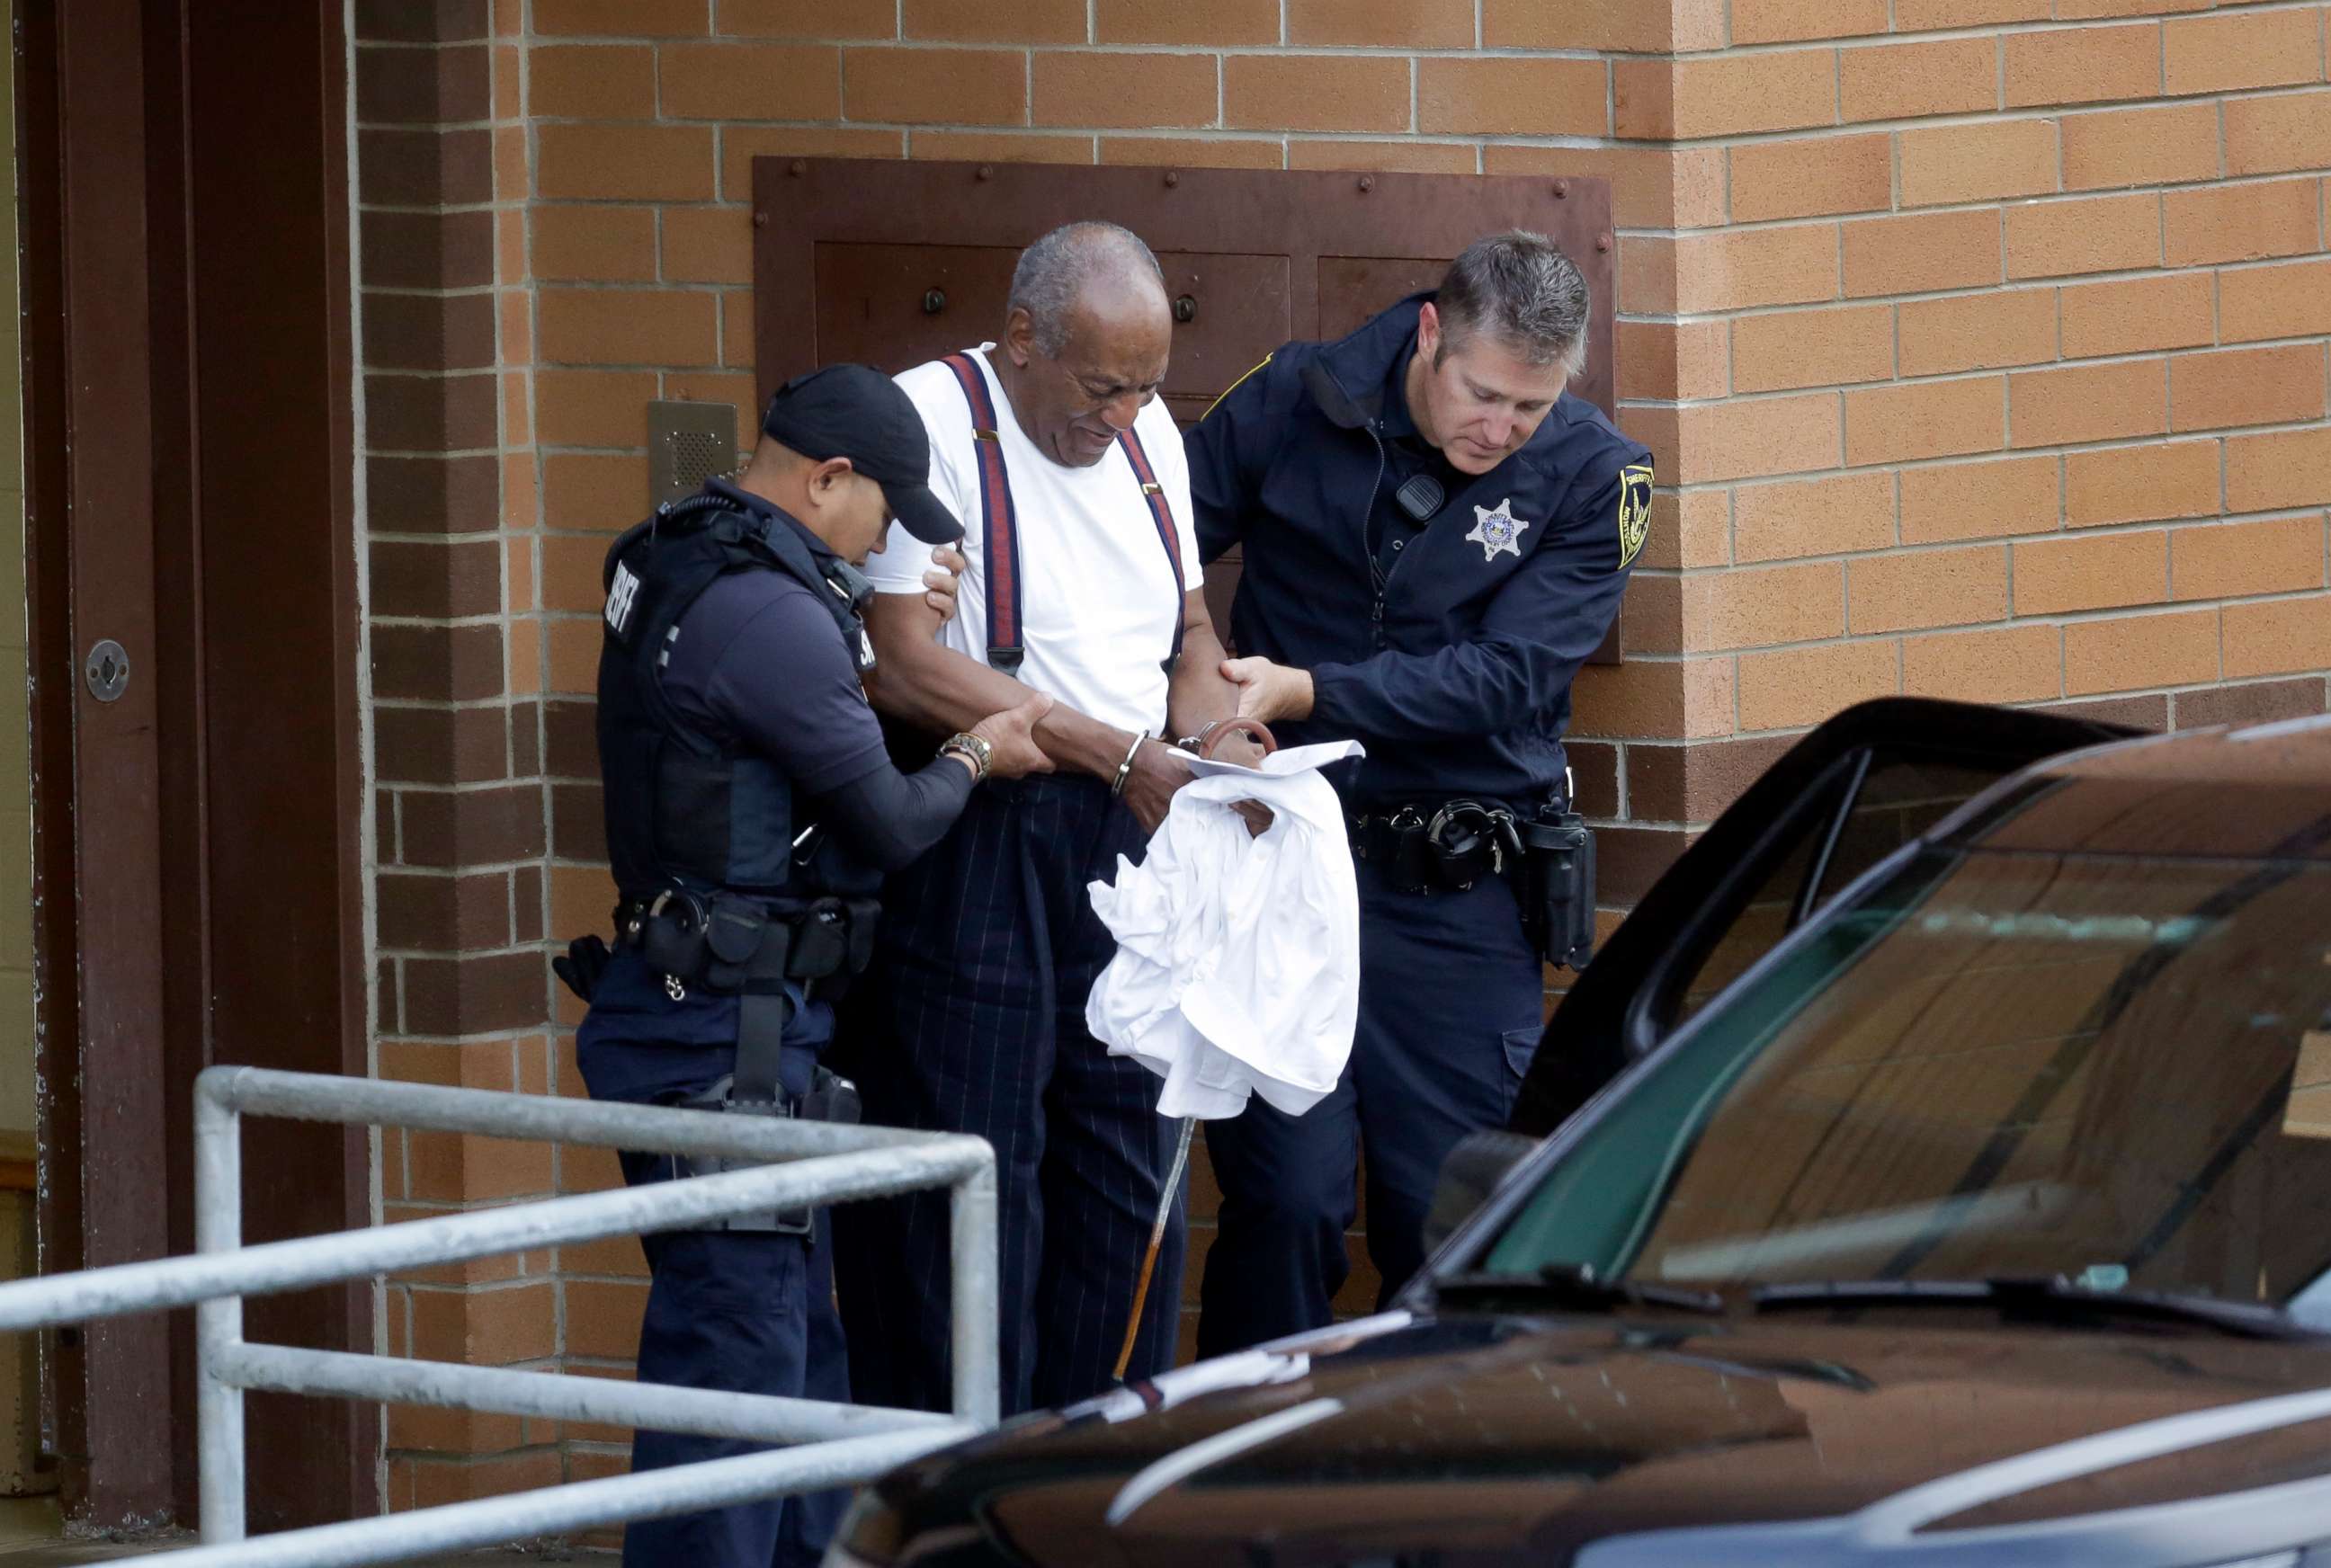 PHOTO: Bill Cosby is escorted out of the Montgomery County Correctional Facility Tuesday Sept. 25, 2018 in Eagleville, Pa., following his sentencing to three-to-10-year prison sentence for sexual assault.